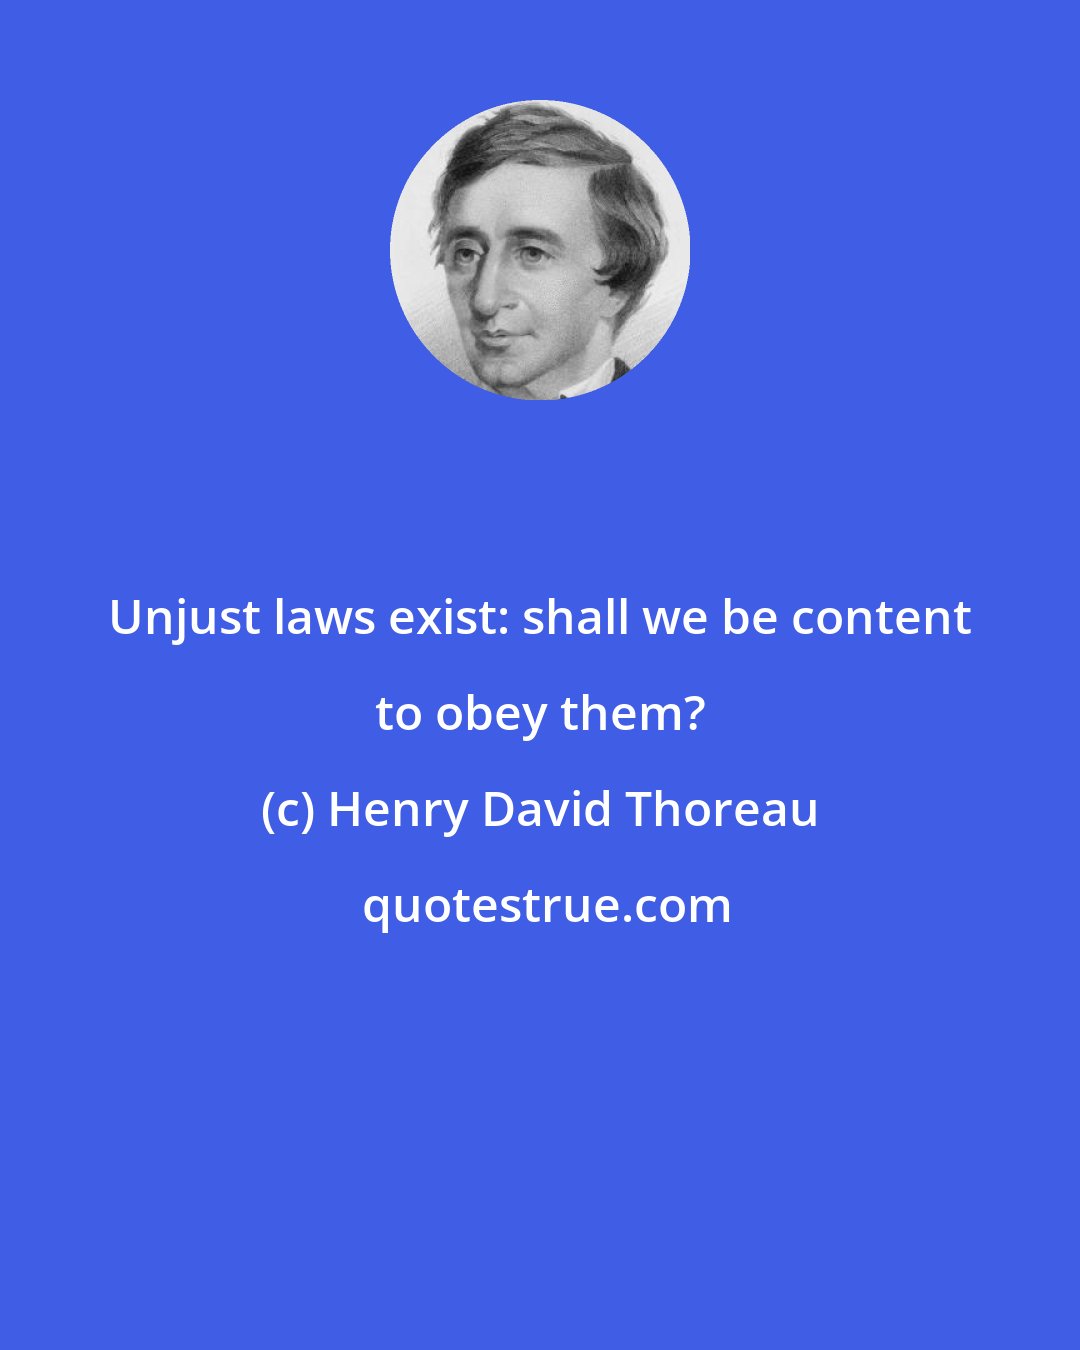 Henry David Thoreau: Unjust laws exist: shall we be content to obey them?